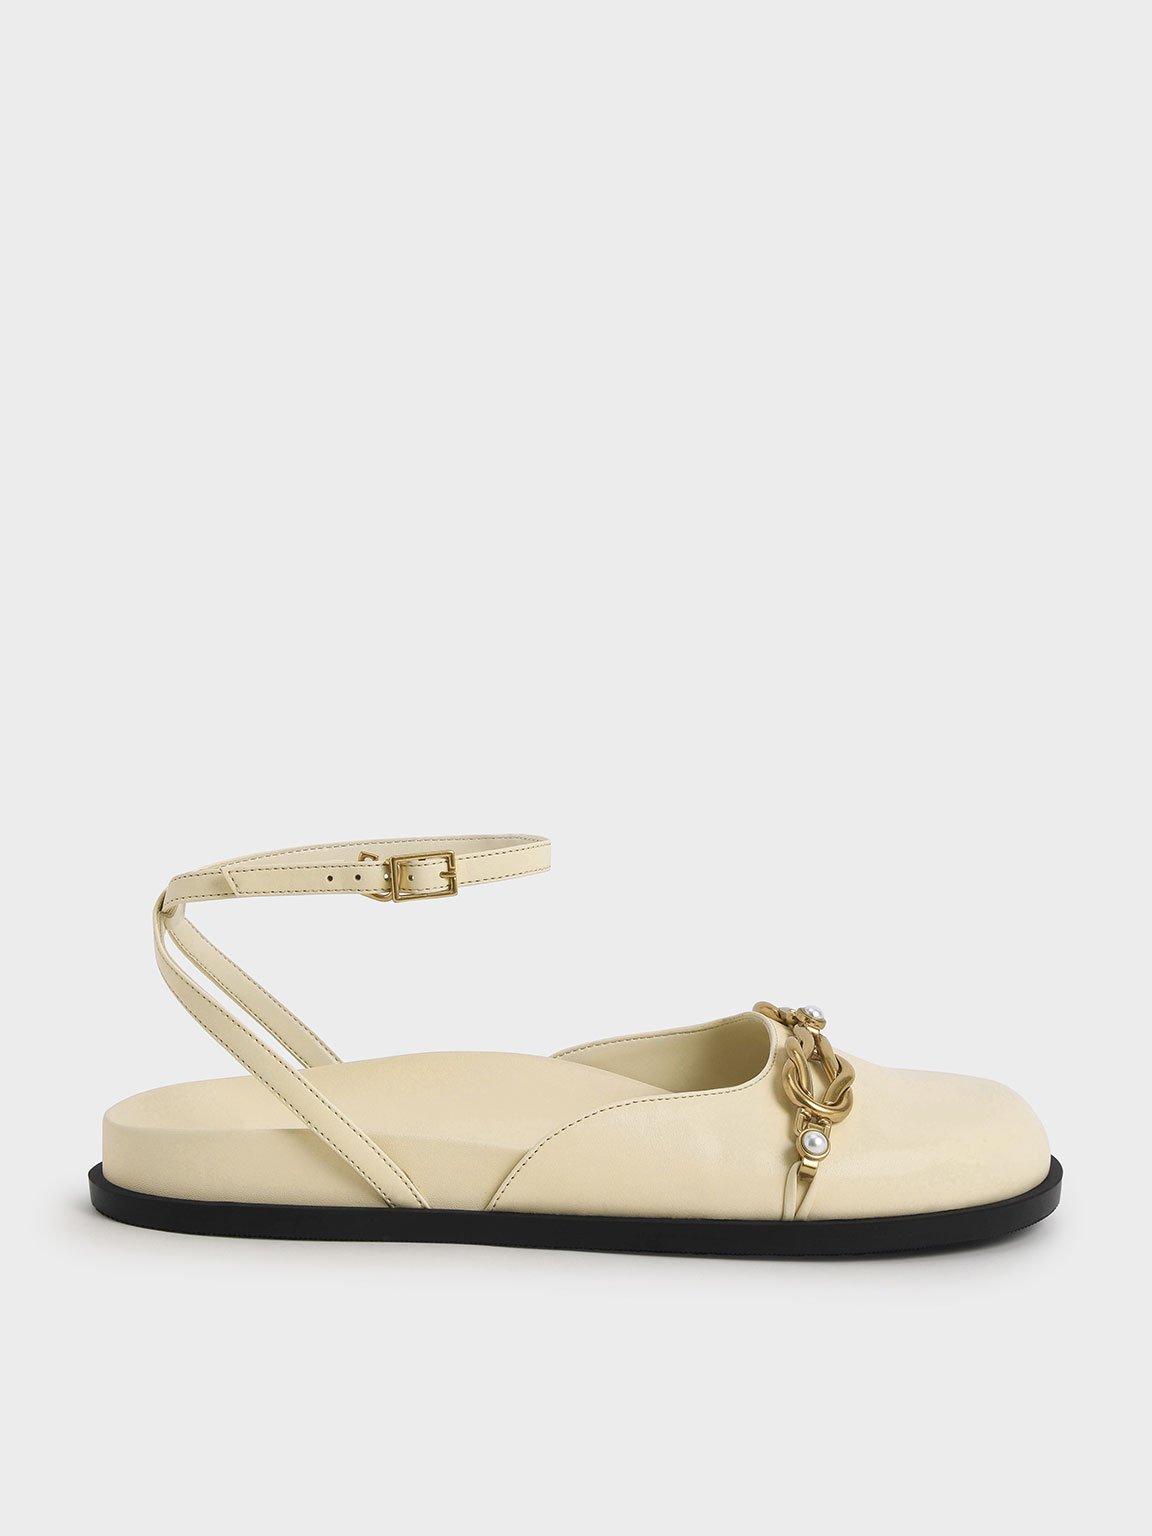 Chalk Beaded Chain-Link Ankle Strap Flats - CHARLES & KEITH SG